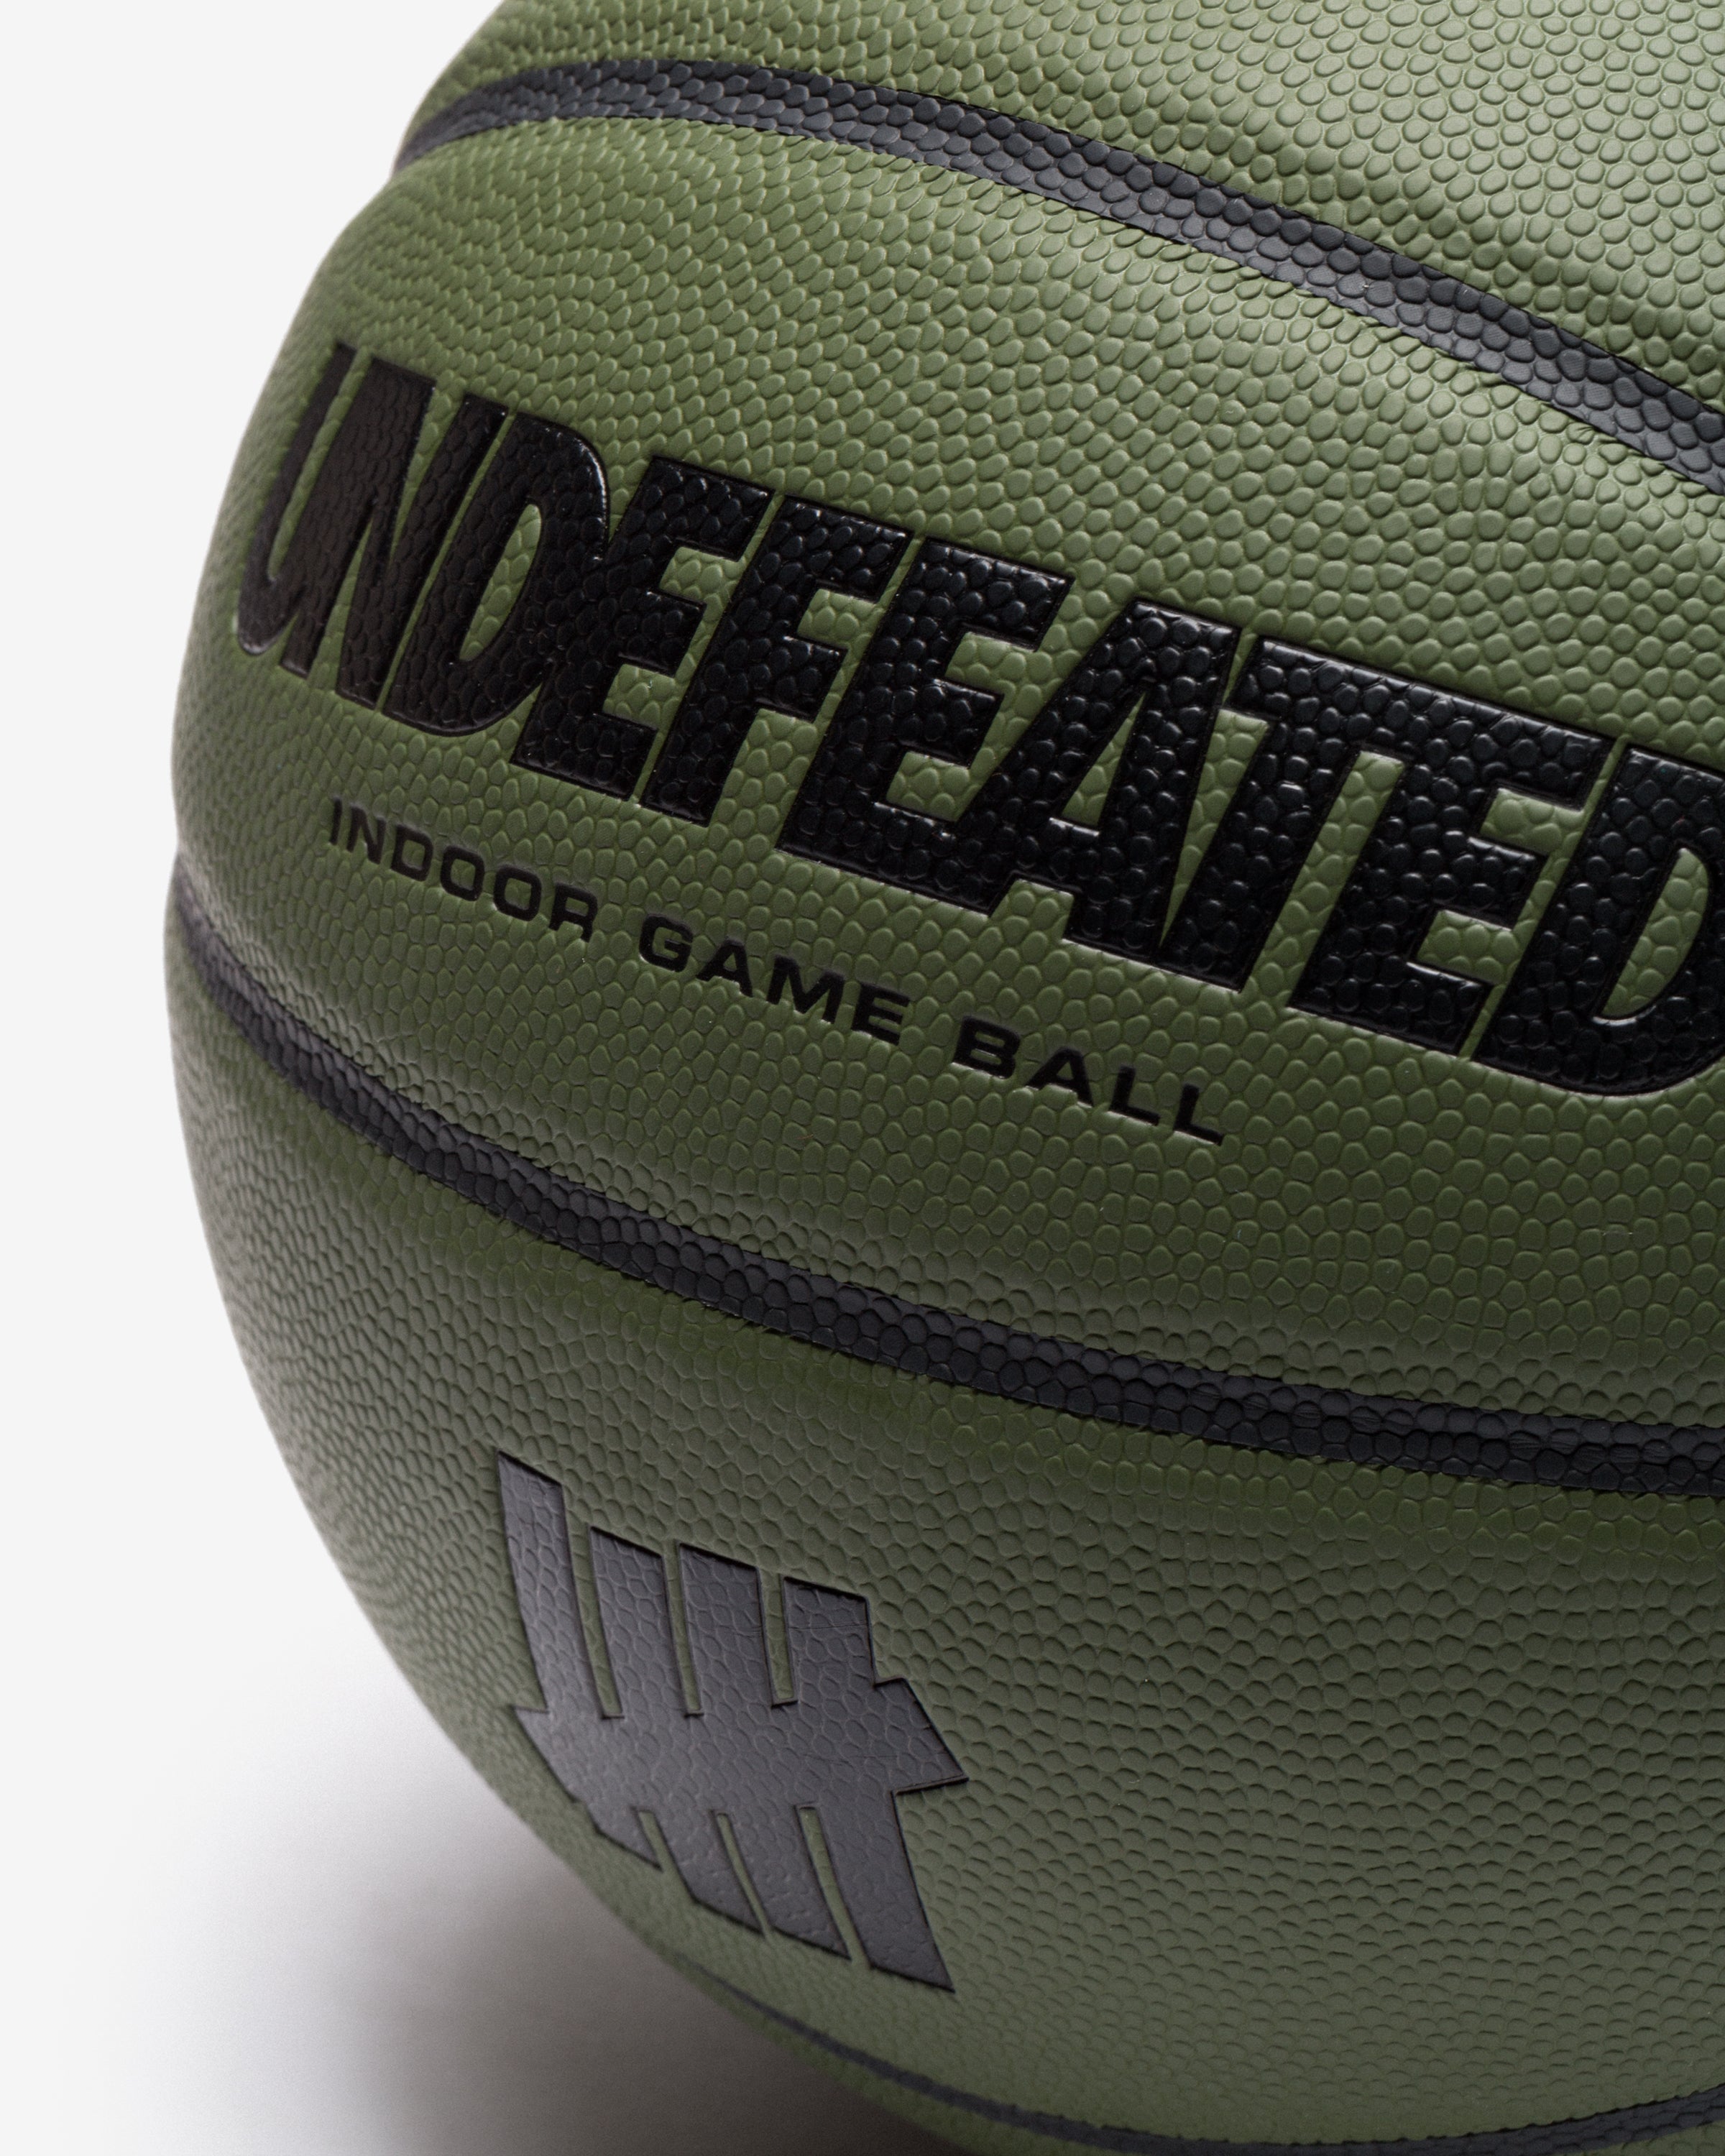 UNDEFEATED X WILSON LIMITED EDITION BASKETBALL - OLIVE